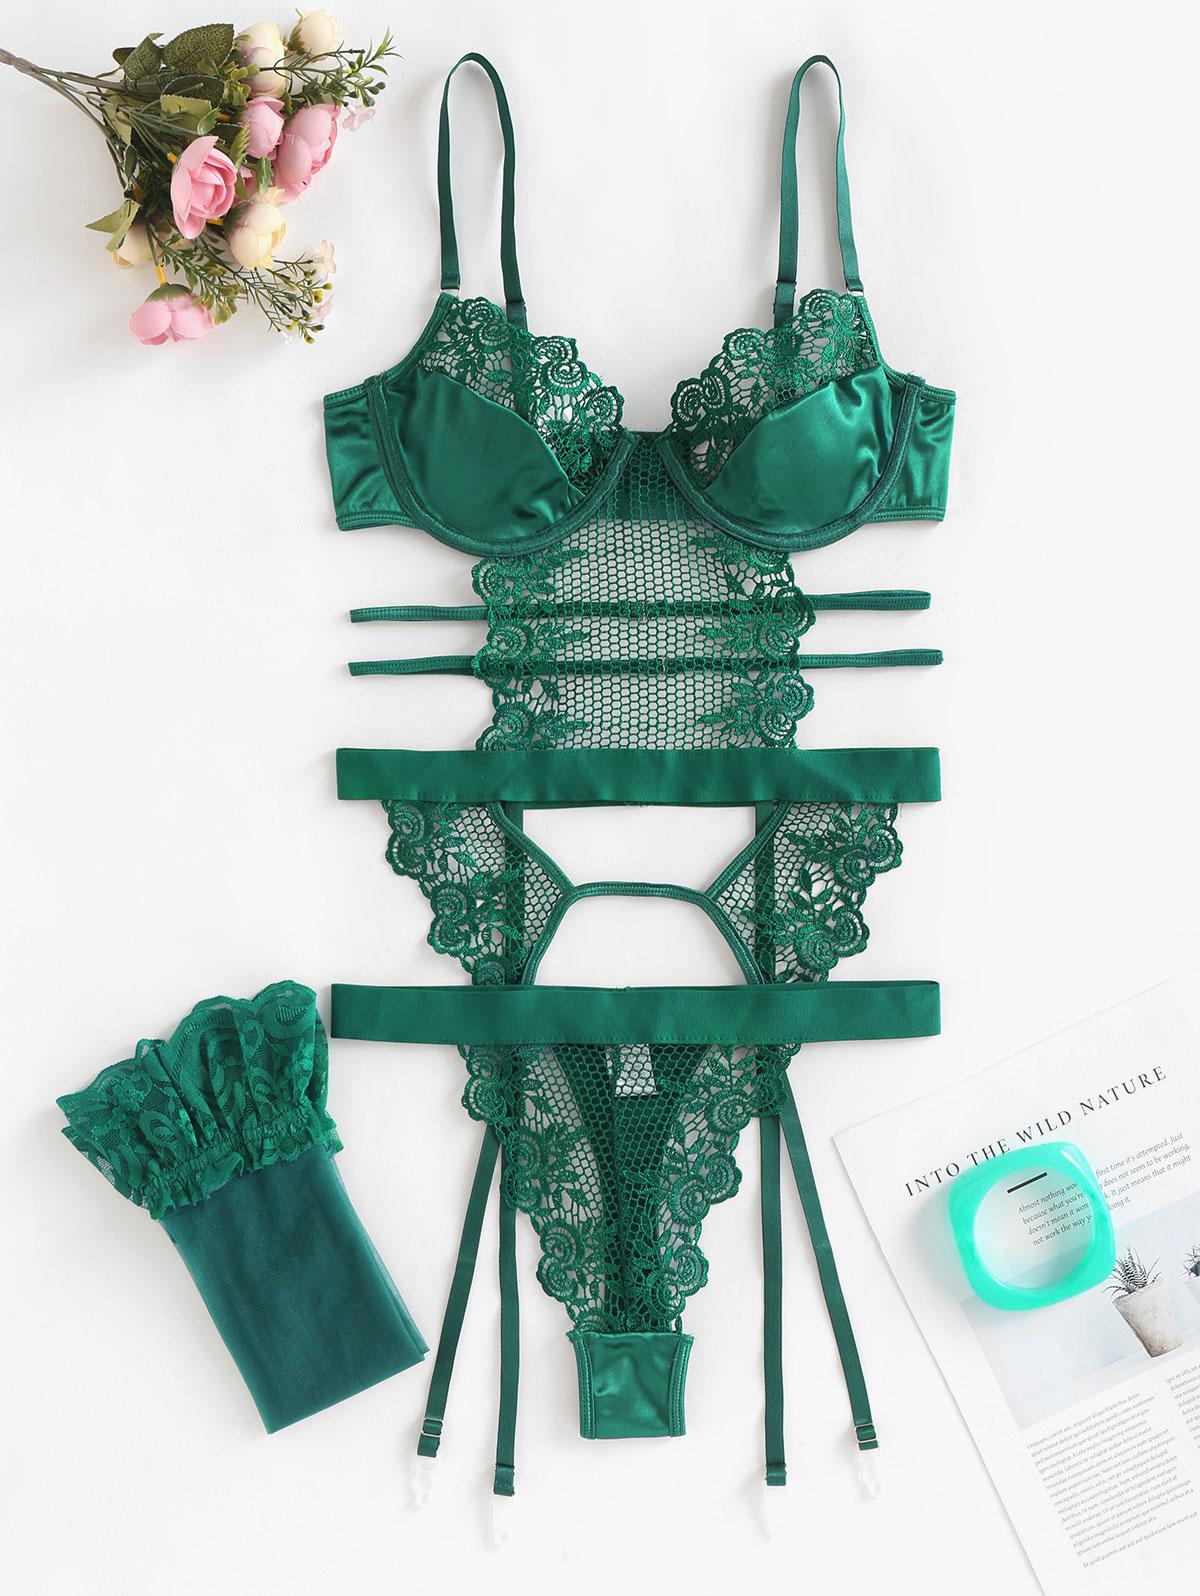 3 PCS Underwire Lace Trim Openwork Strappy Garter Lingerie Bustier Set(Include Mesh Thigh High Stockings) M Green